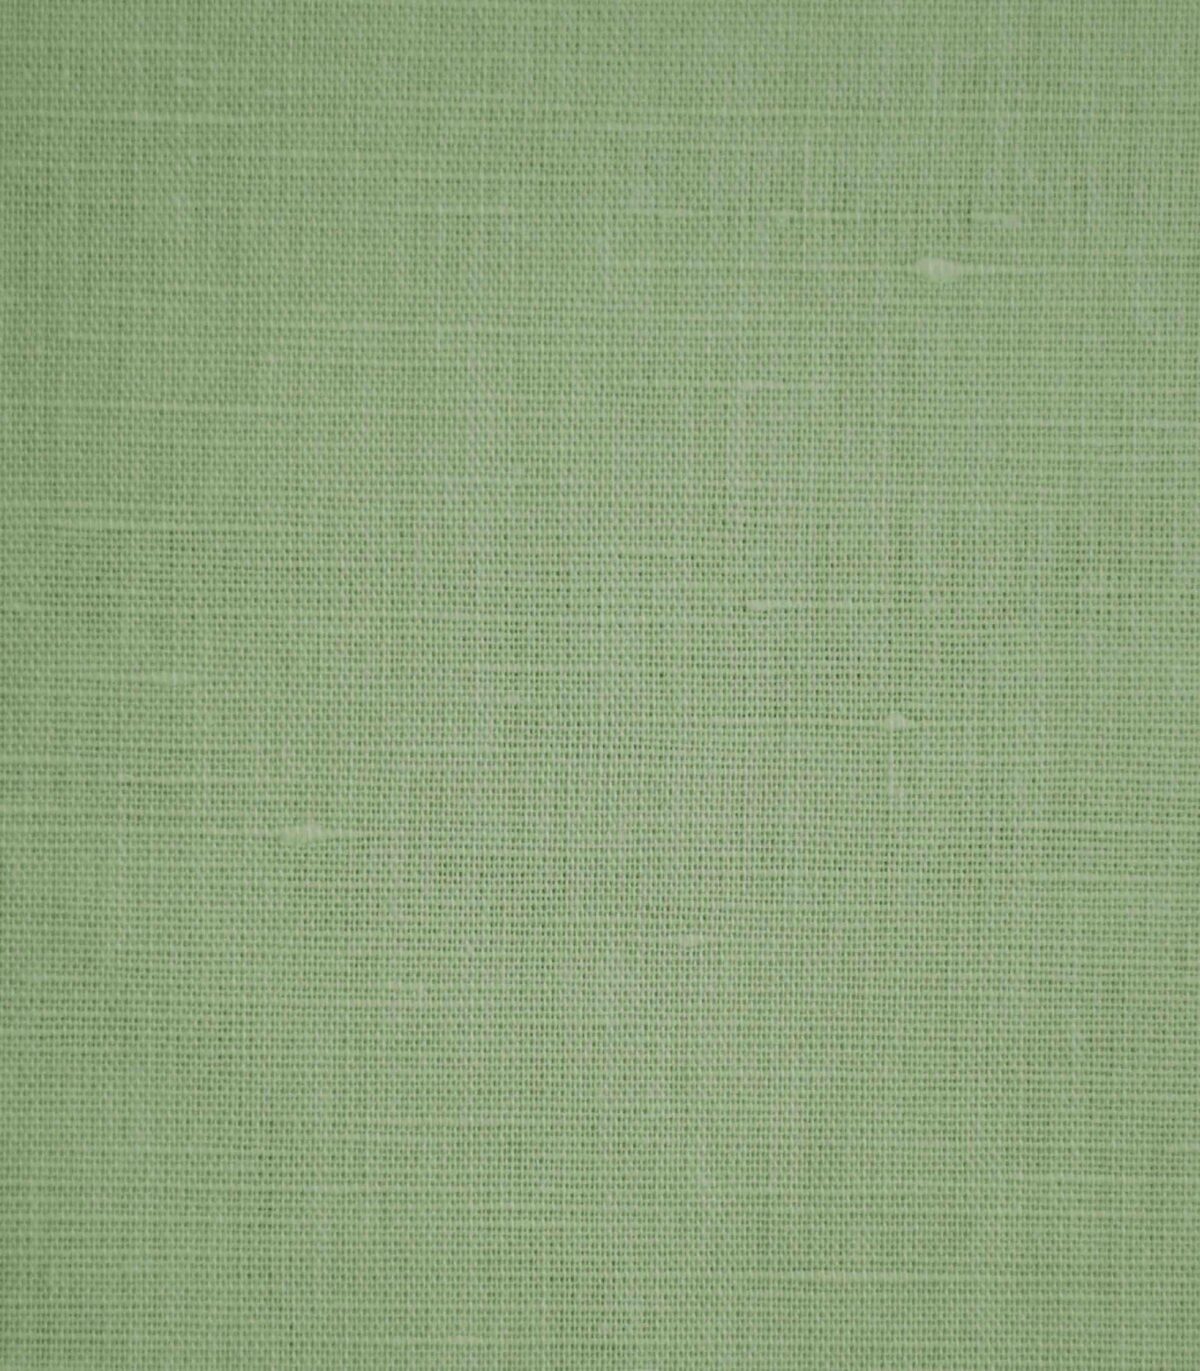 Parrot Green Solid Fabric